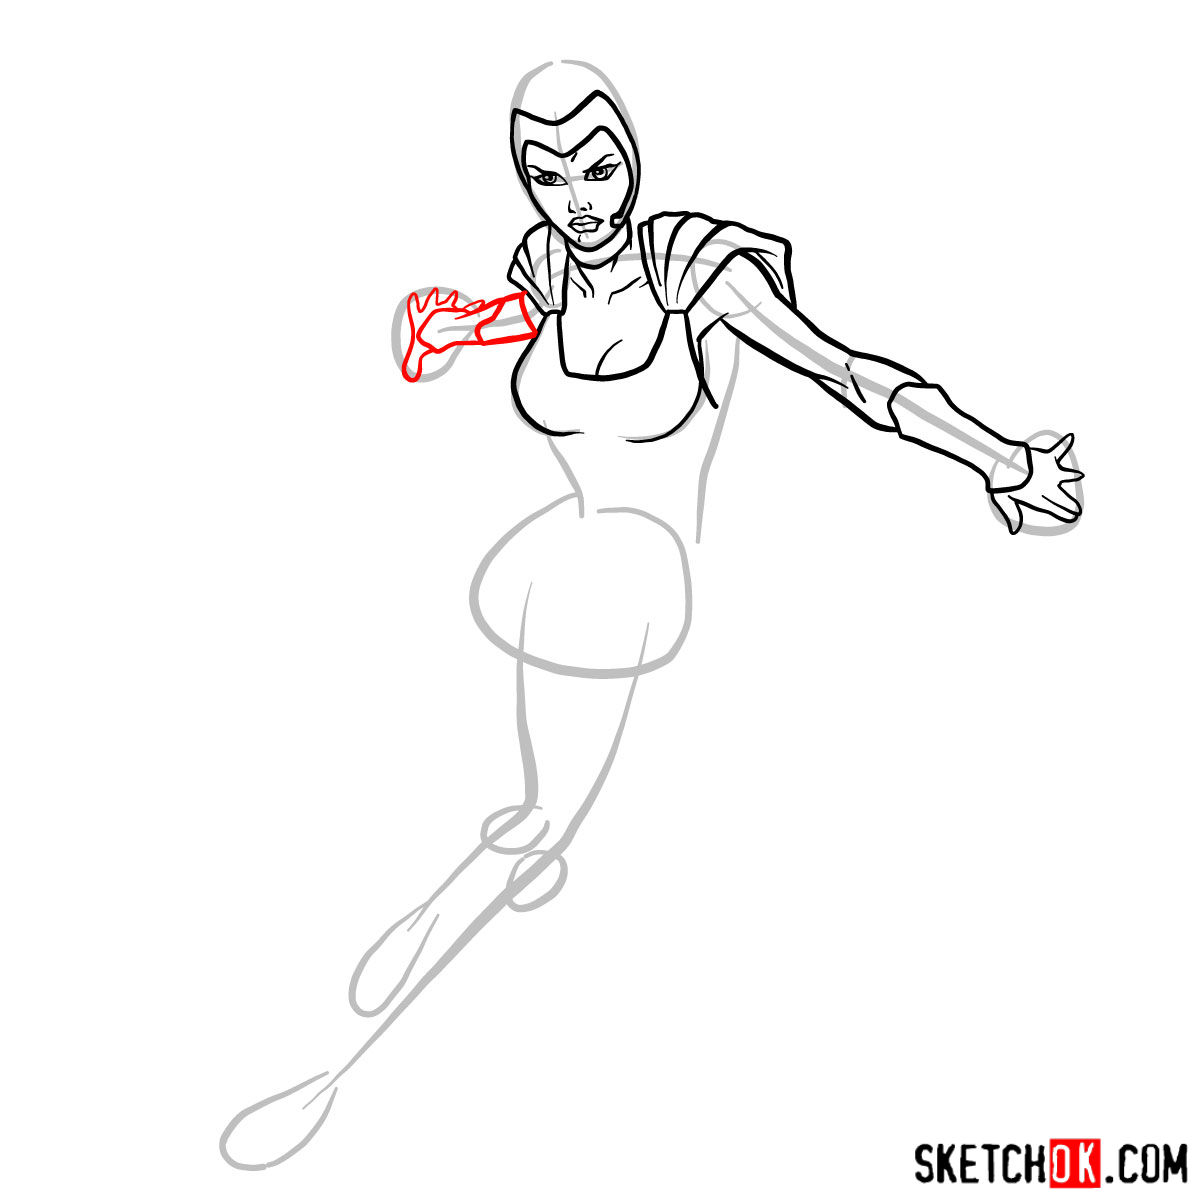 How to draw Polaris mutant from X-Men - step 07